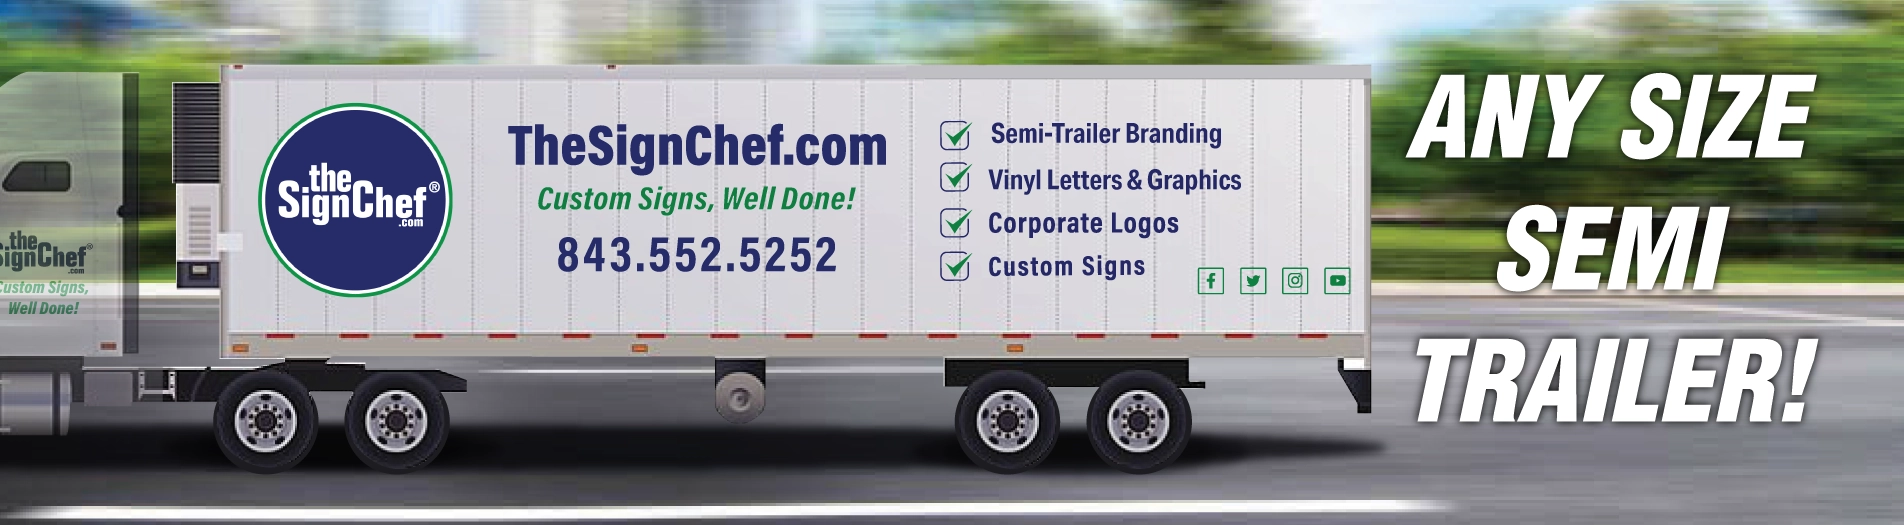 High Coverage Vinyl Graphics Package on Semi Trailer: Enhance the Visual Appeal and Branding